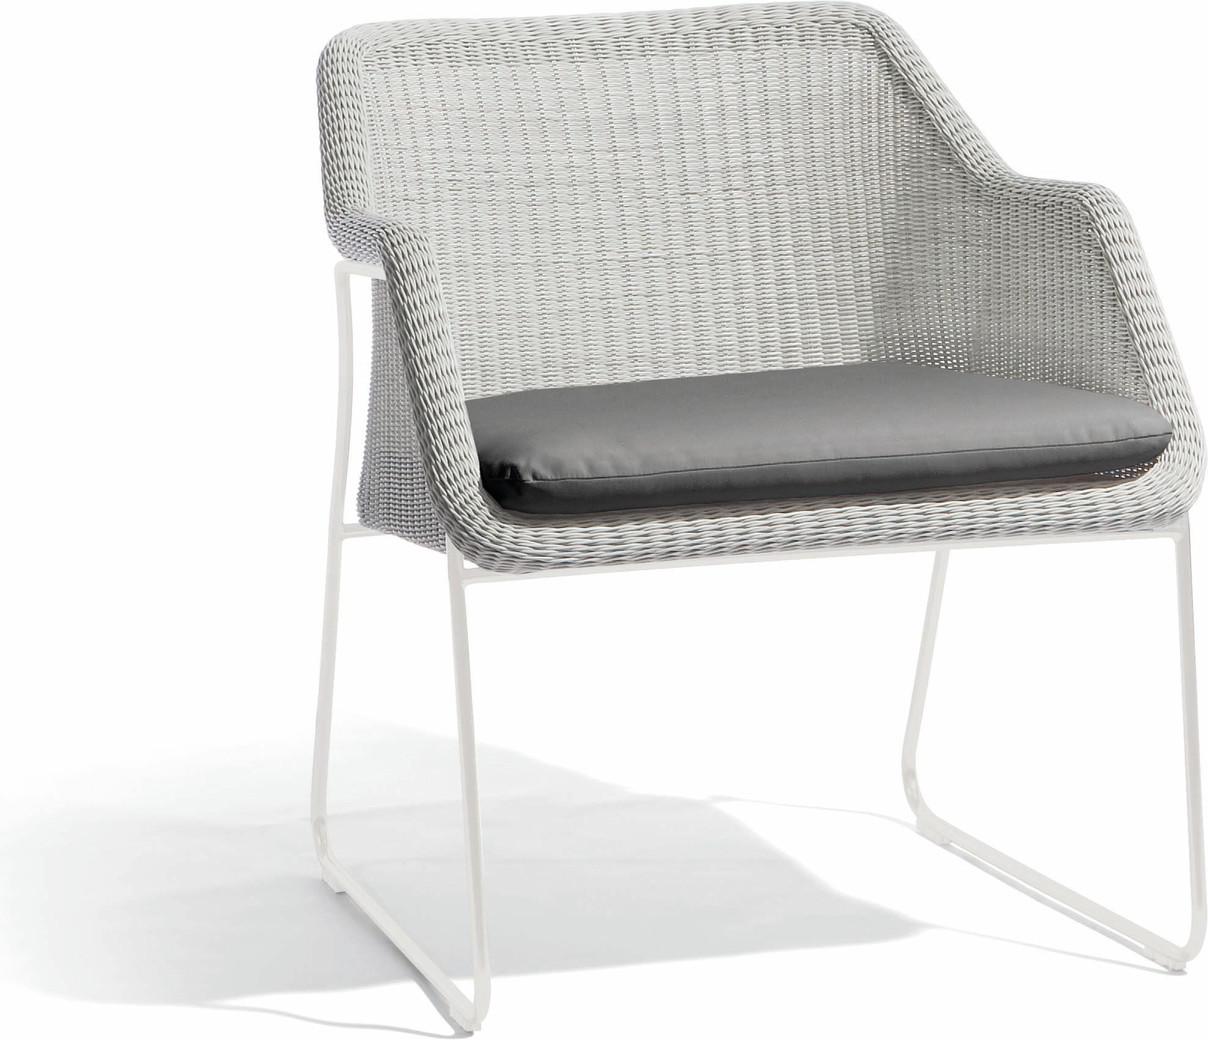 Mood 1 seater - white - cord 2mm off white